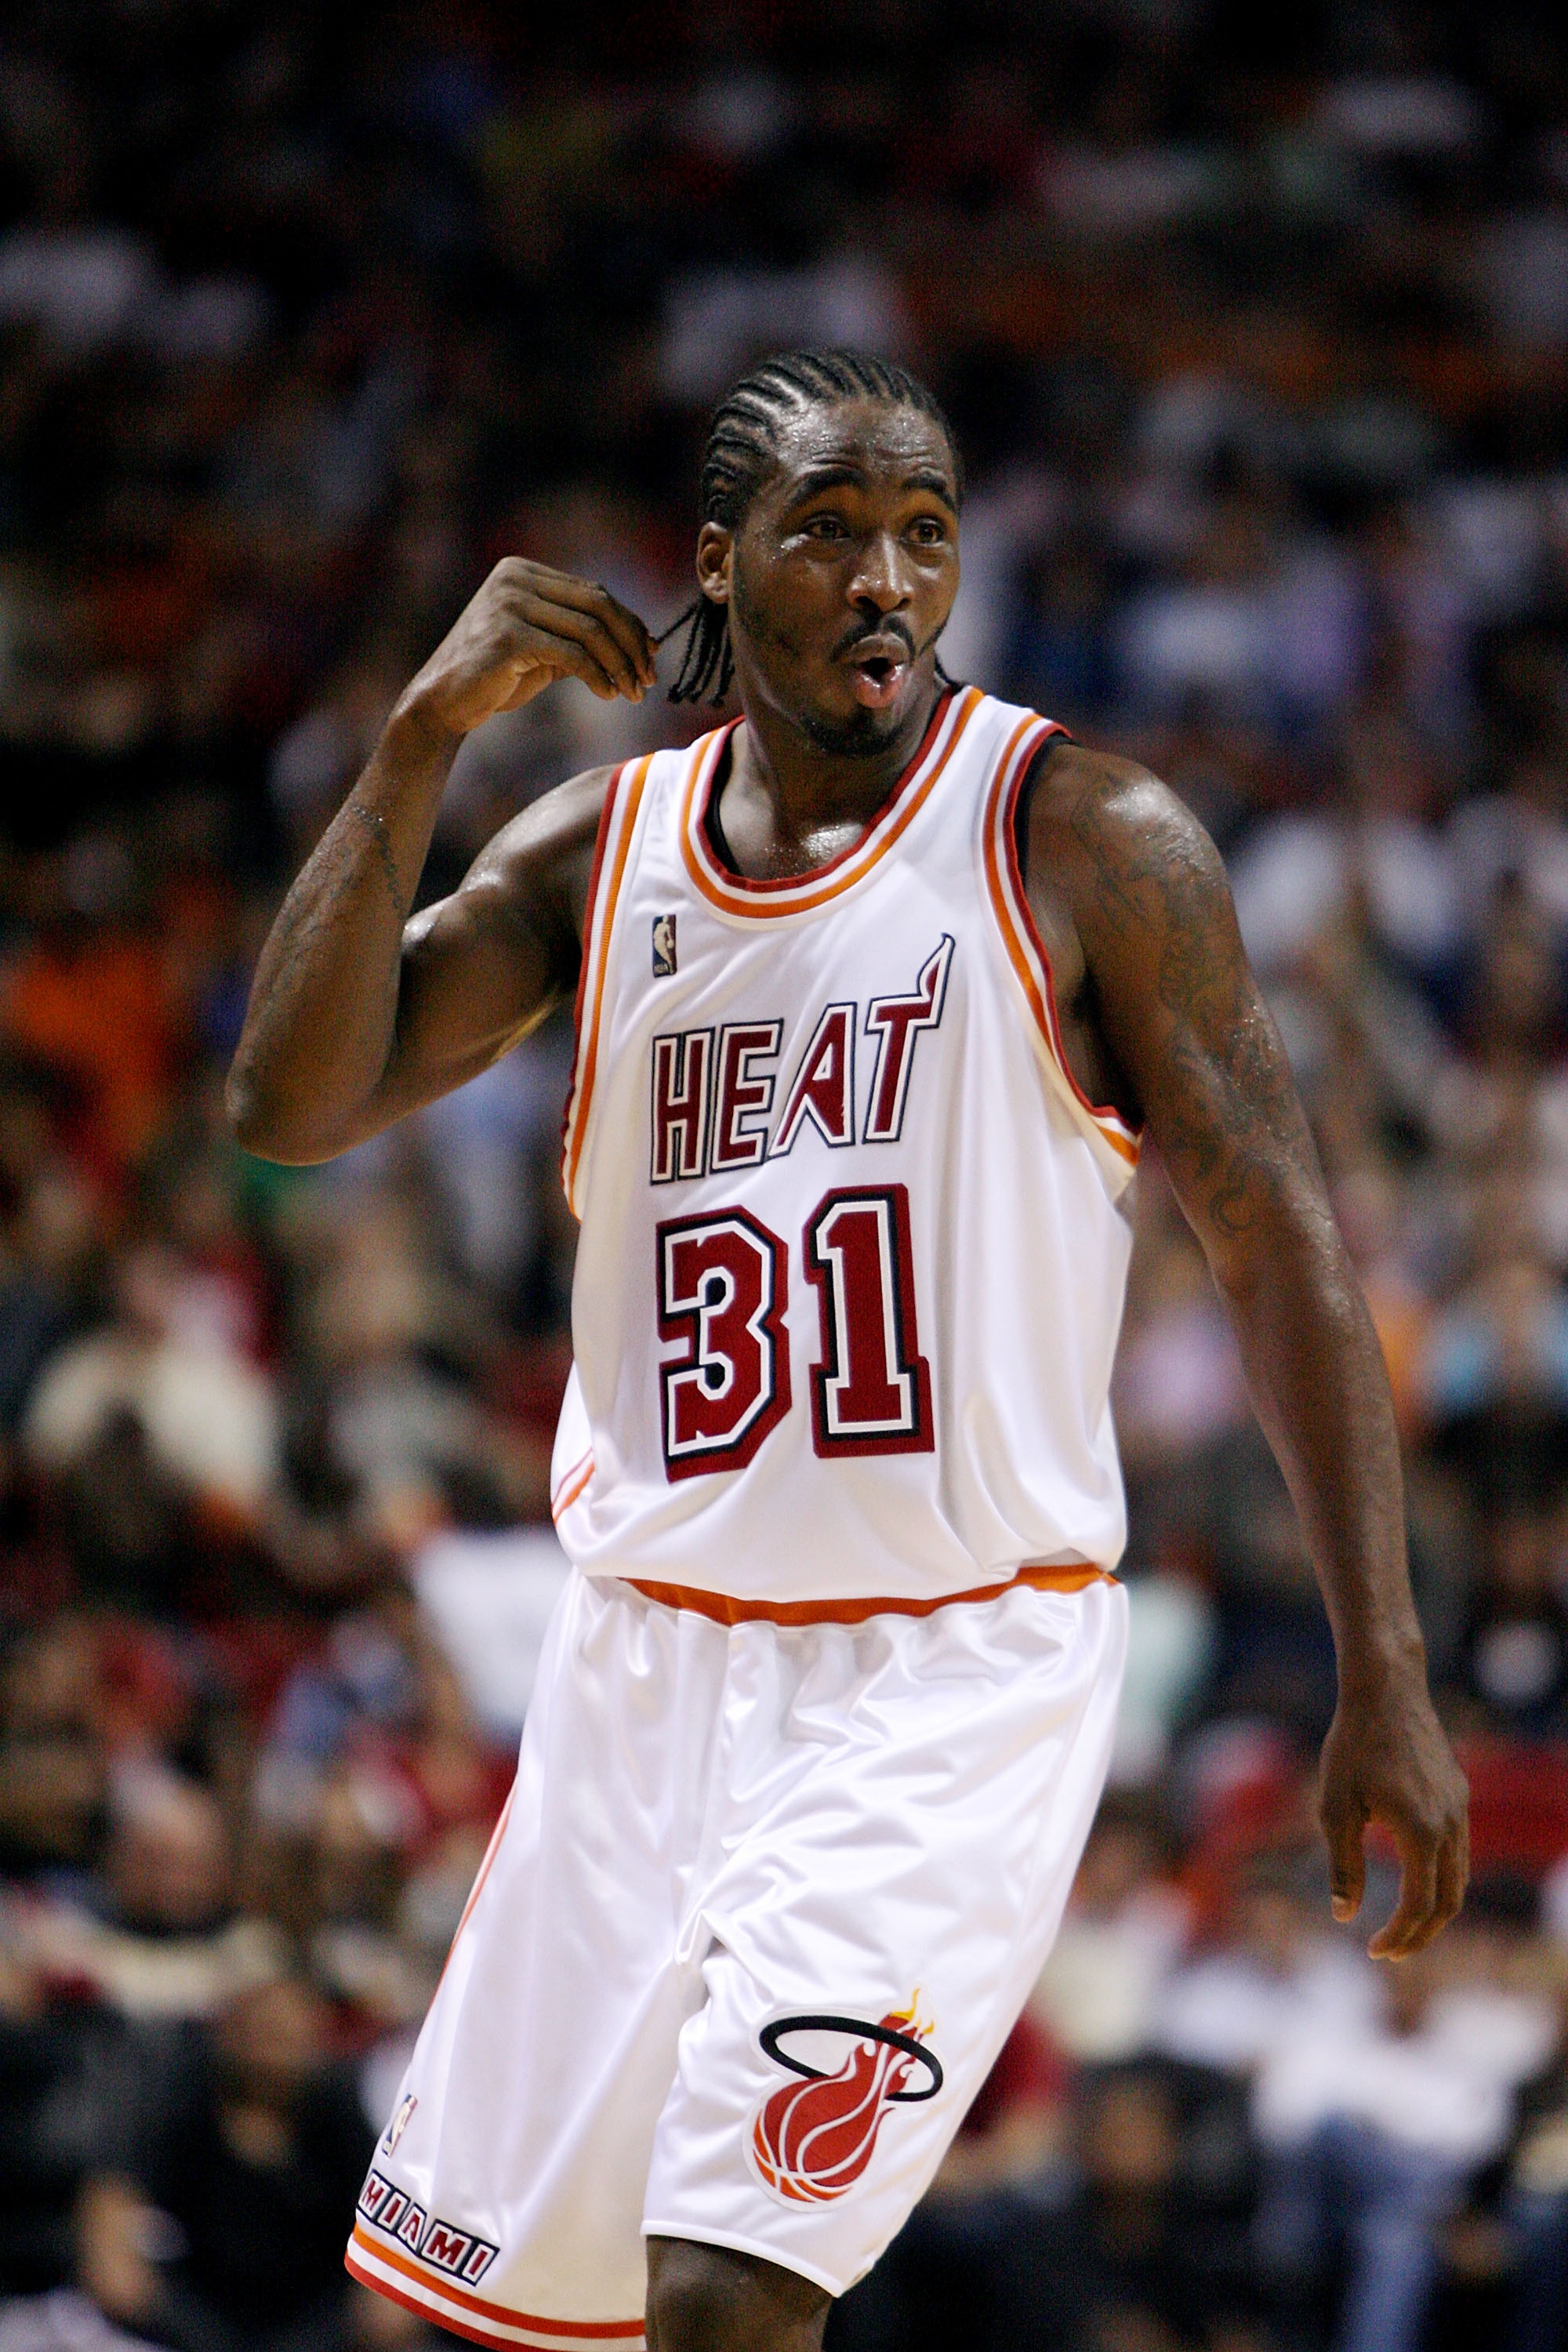 MIAMI - DECEMBER 22:  Ricky Davis #31 of the Miami Heat celebrates after a play against the Utah Jazz at American Airlines Arena December 22, 2007 in Miami, Florida. The Heat defeated the Jazz 104-102. NOTE TO USER: User expressly acknowledges and agrees